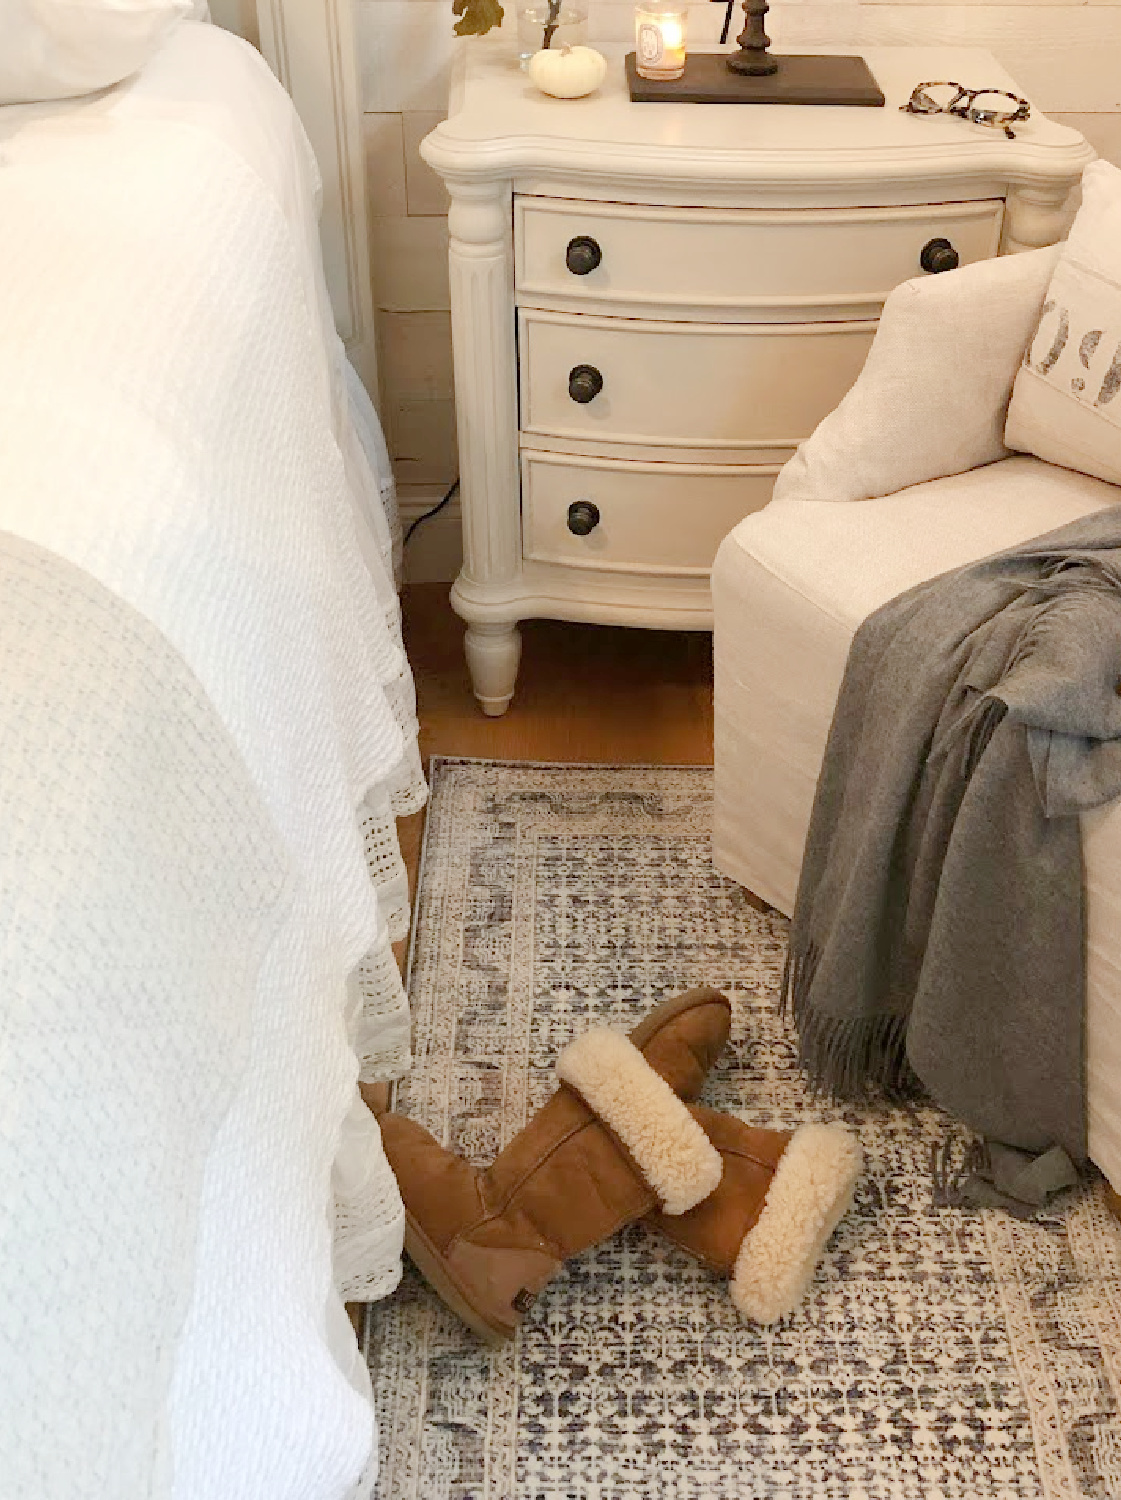 Ugg tall boots in Hello Lovely's fall bedroom with Zuma Zum ocean area rug (Amber Lewis x Loloi).